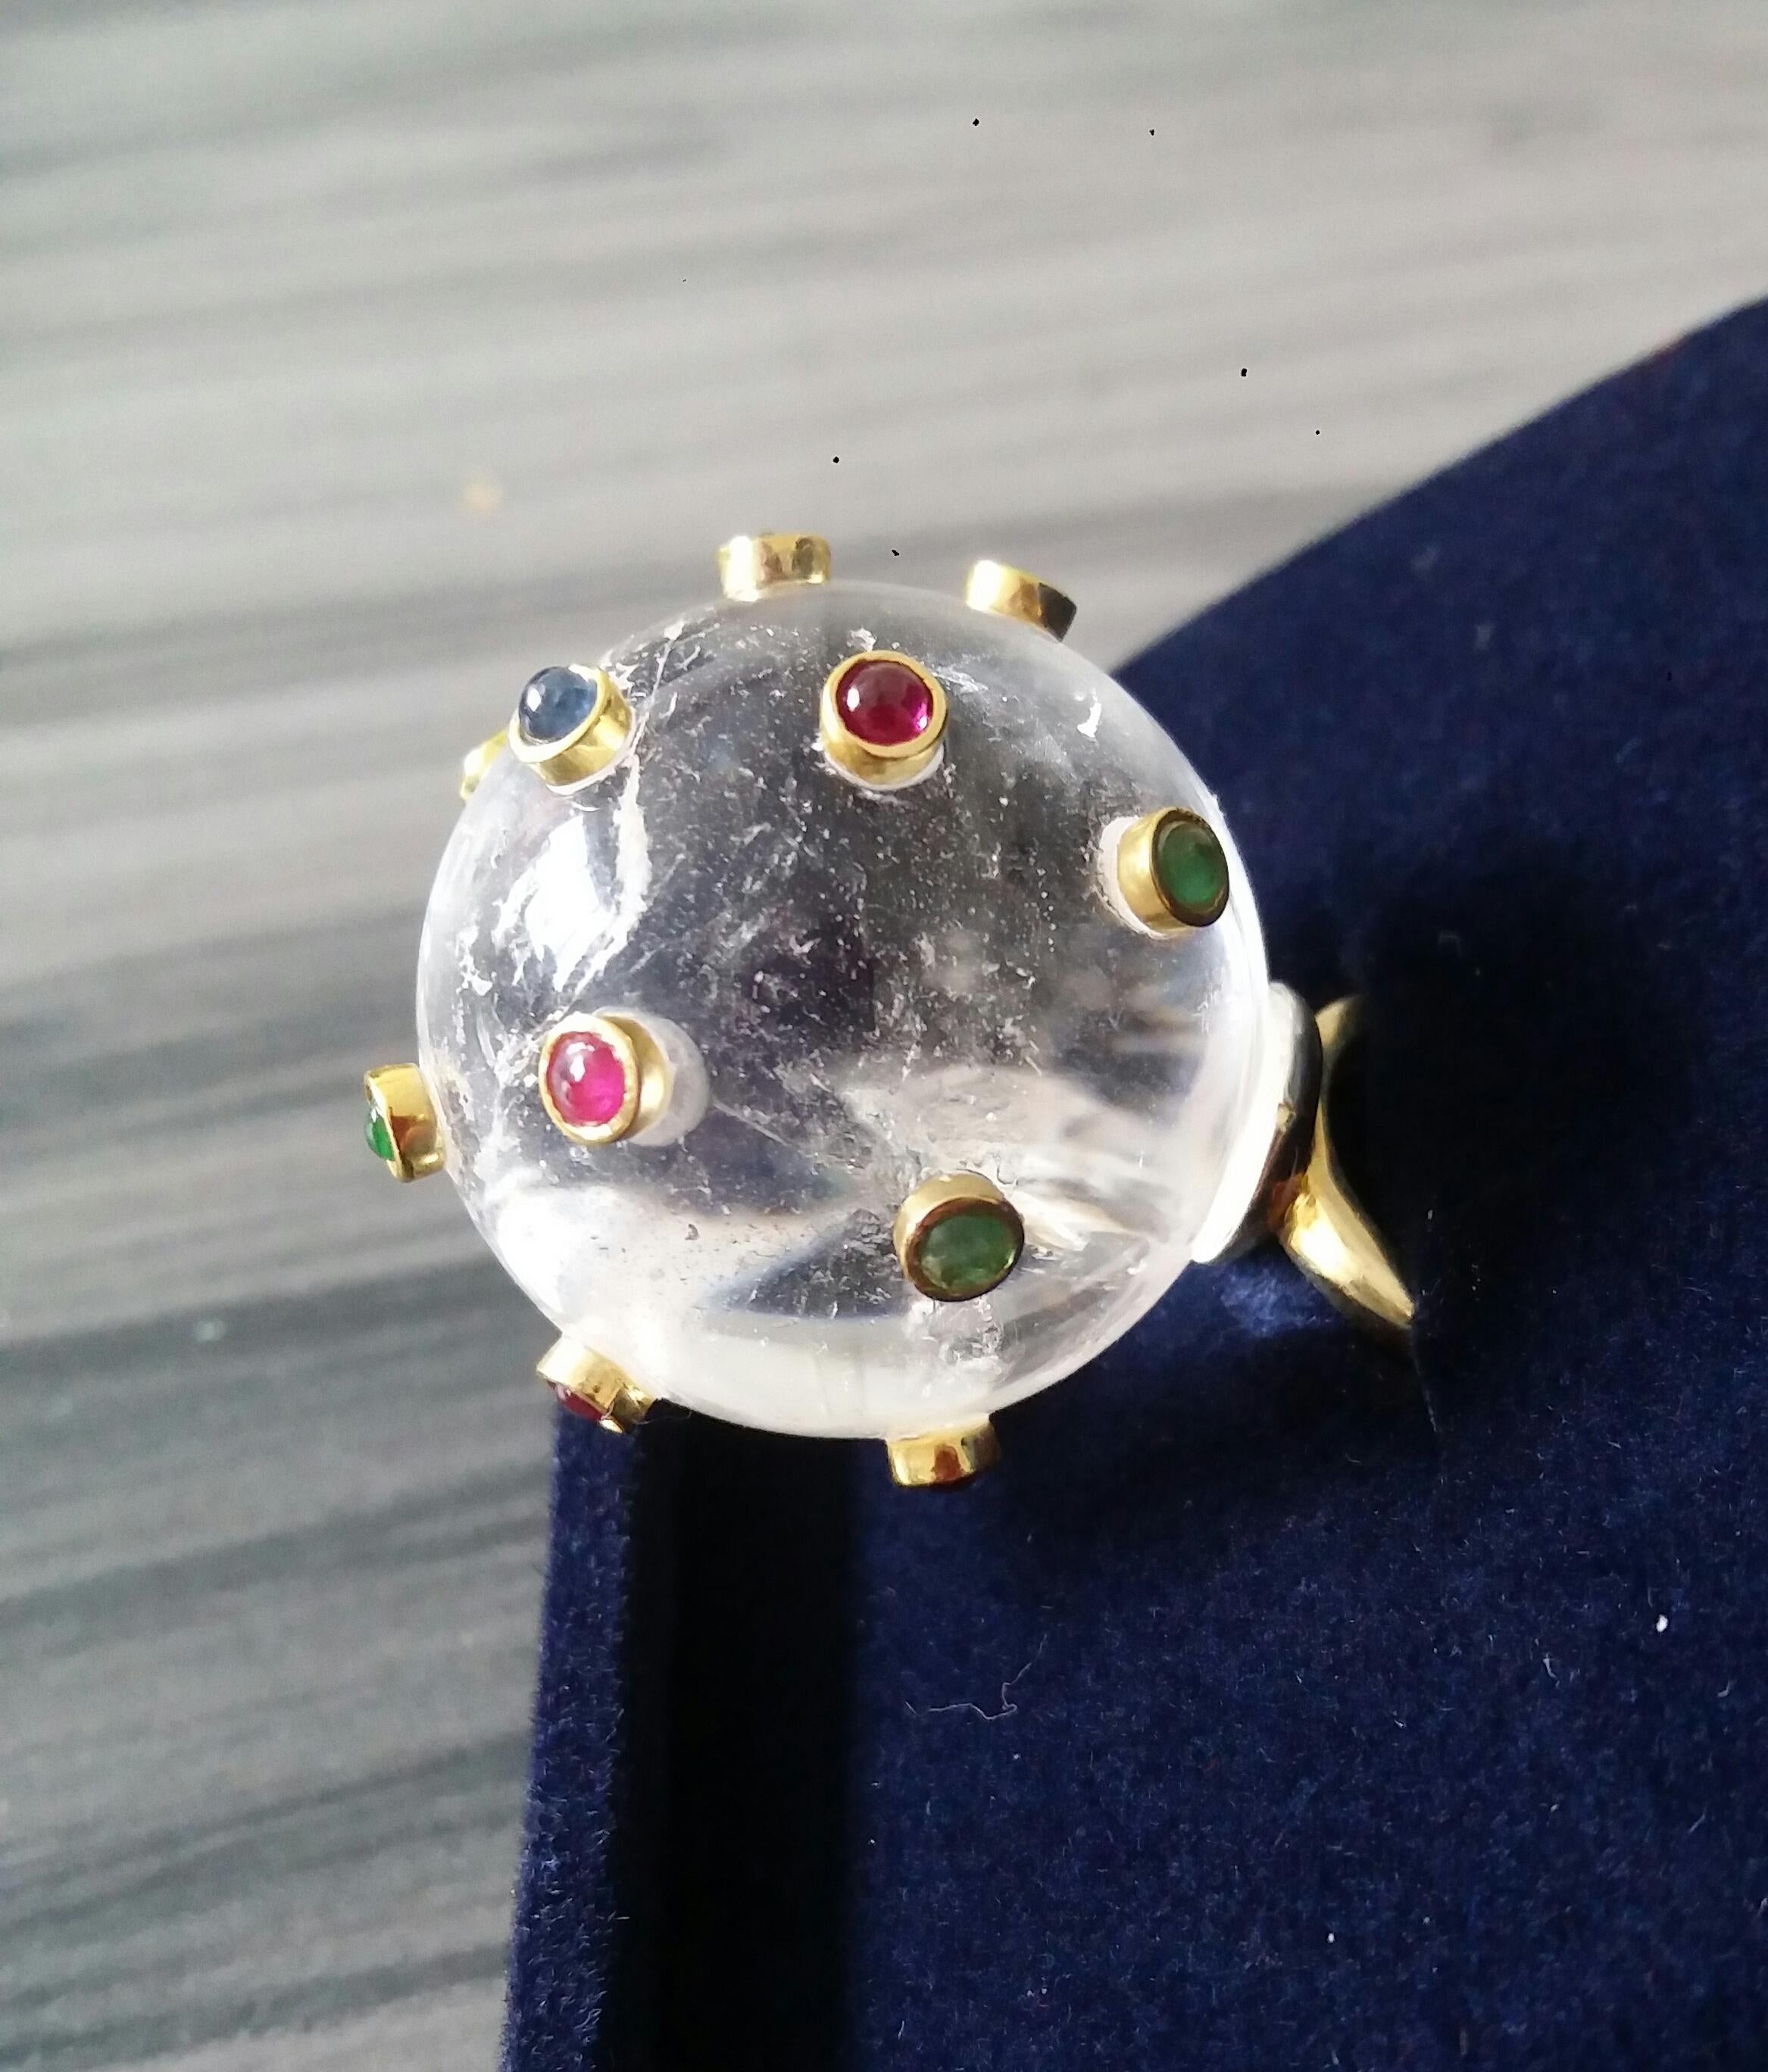 150 Carat Natural Quartz Ball Rubies Emeralds Sapphires Round Cabs 14K Gold Ring For Sale 10